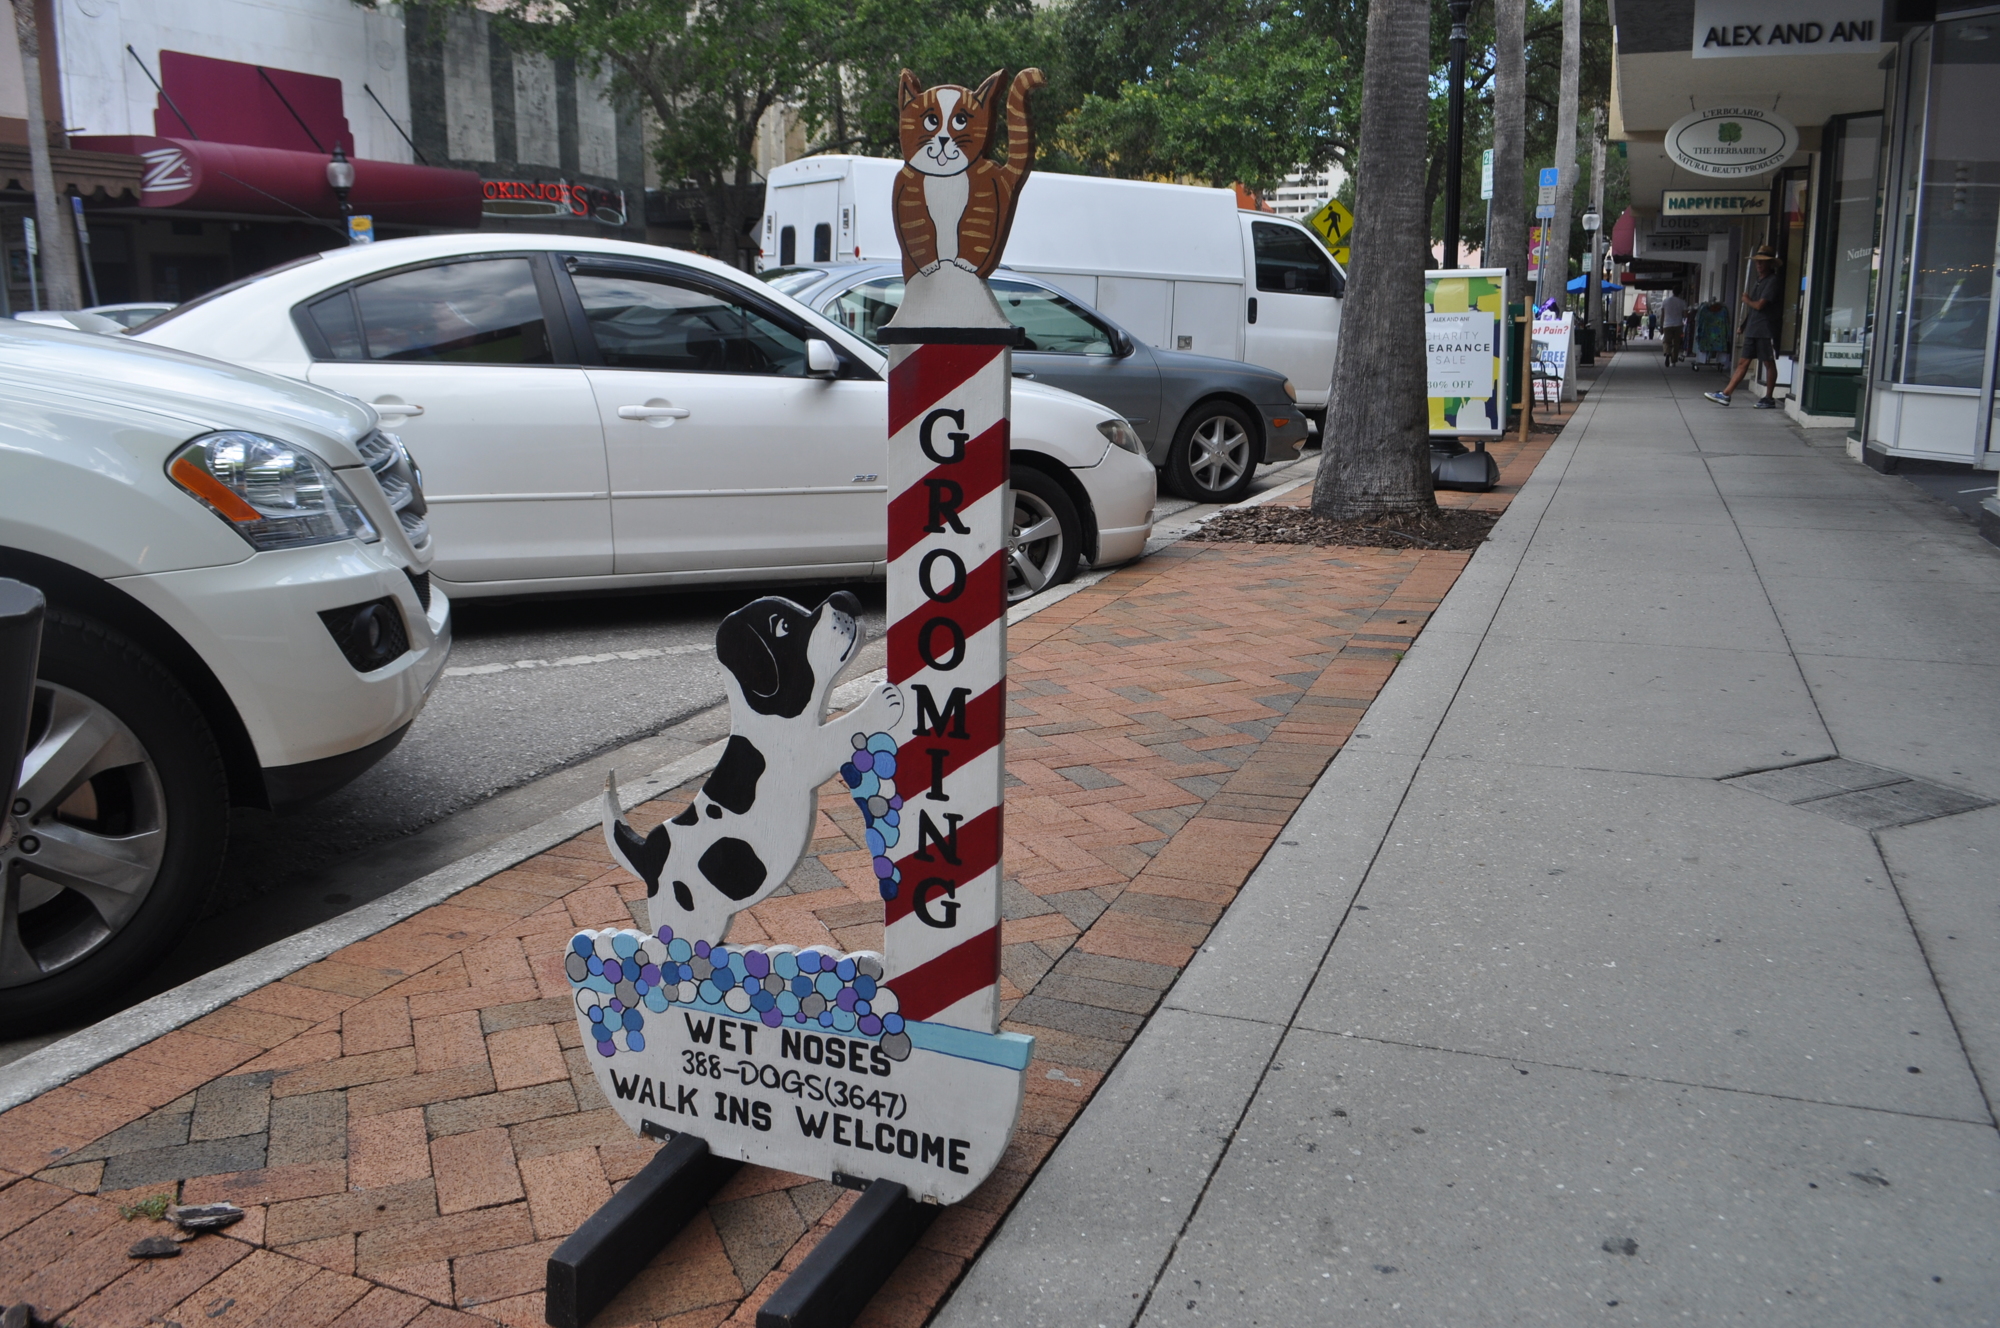 Several downtown stores, such as Wet Noses, forego the traditional A-frame sign to draw attention to their businesses.